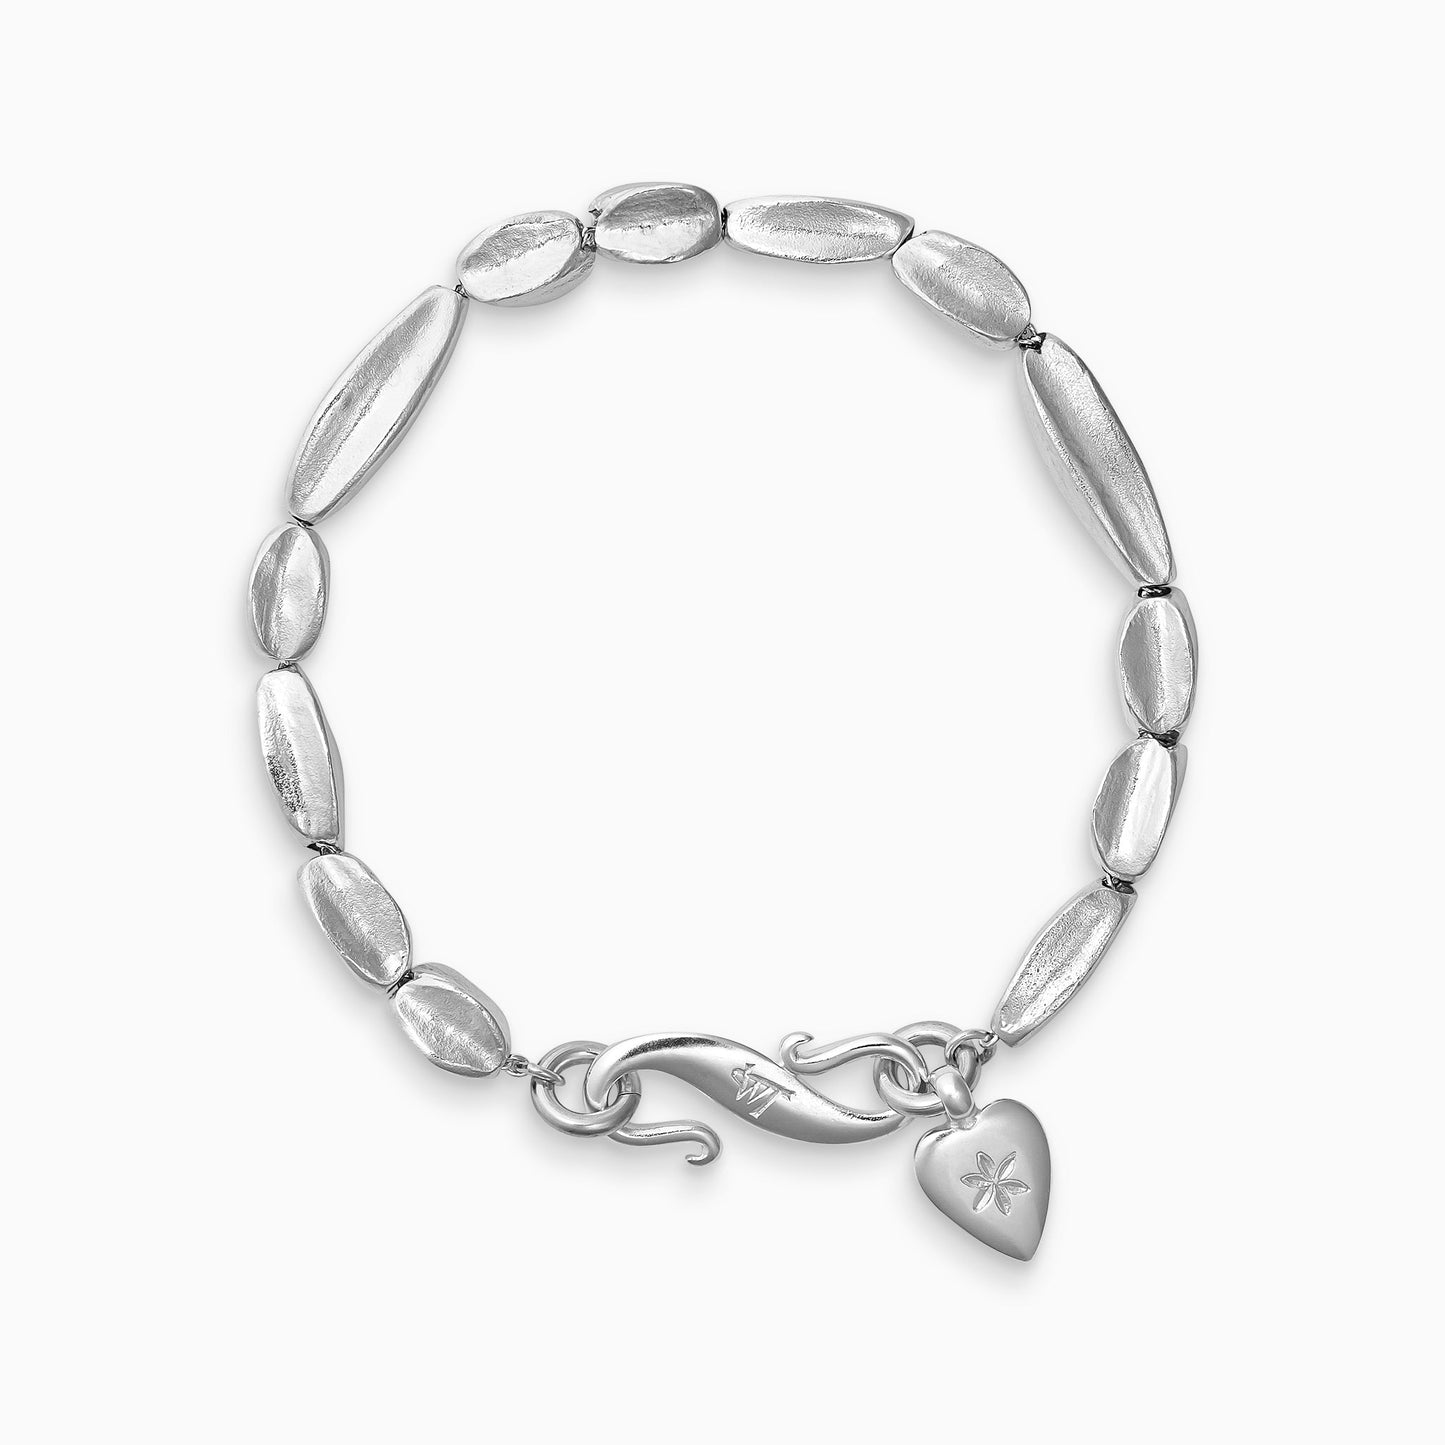 A recycled Silver bracelet of handmade organic, concave, square section textured ‘Baluba’ beads. Finished with a smooth heart shaped charm, engraved with a 6 petal flower and our signature ’S’ clasp.Bracelet length 190mm.. Beads varying lengths from 10mm to 40mm. Cross section of each bead approximately 6mm.